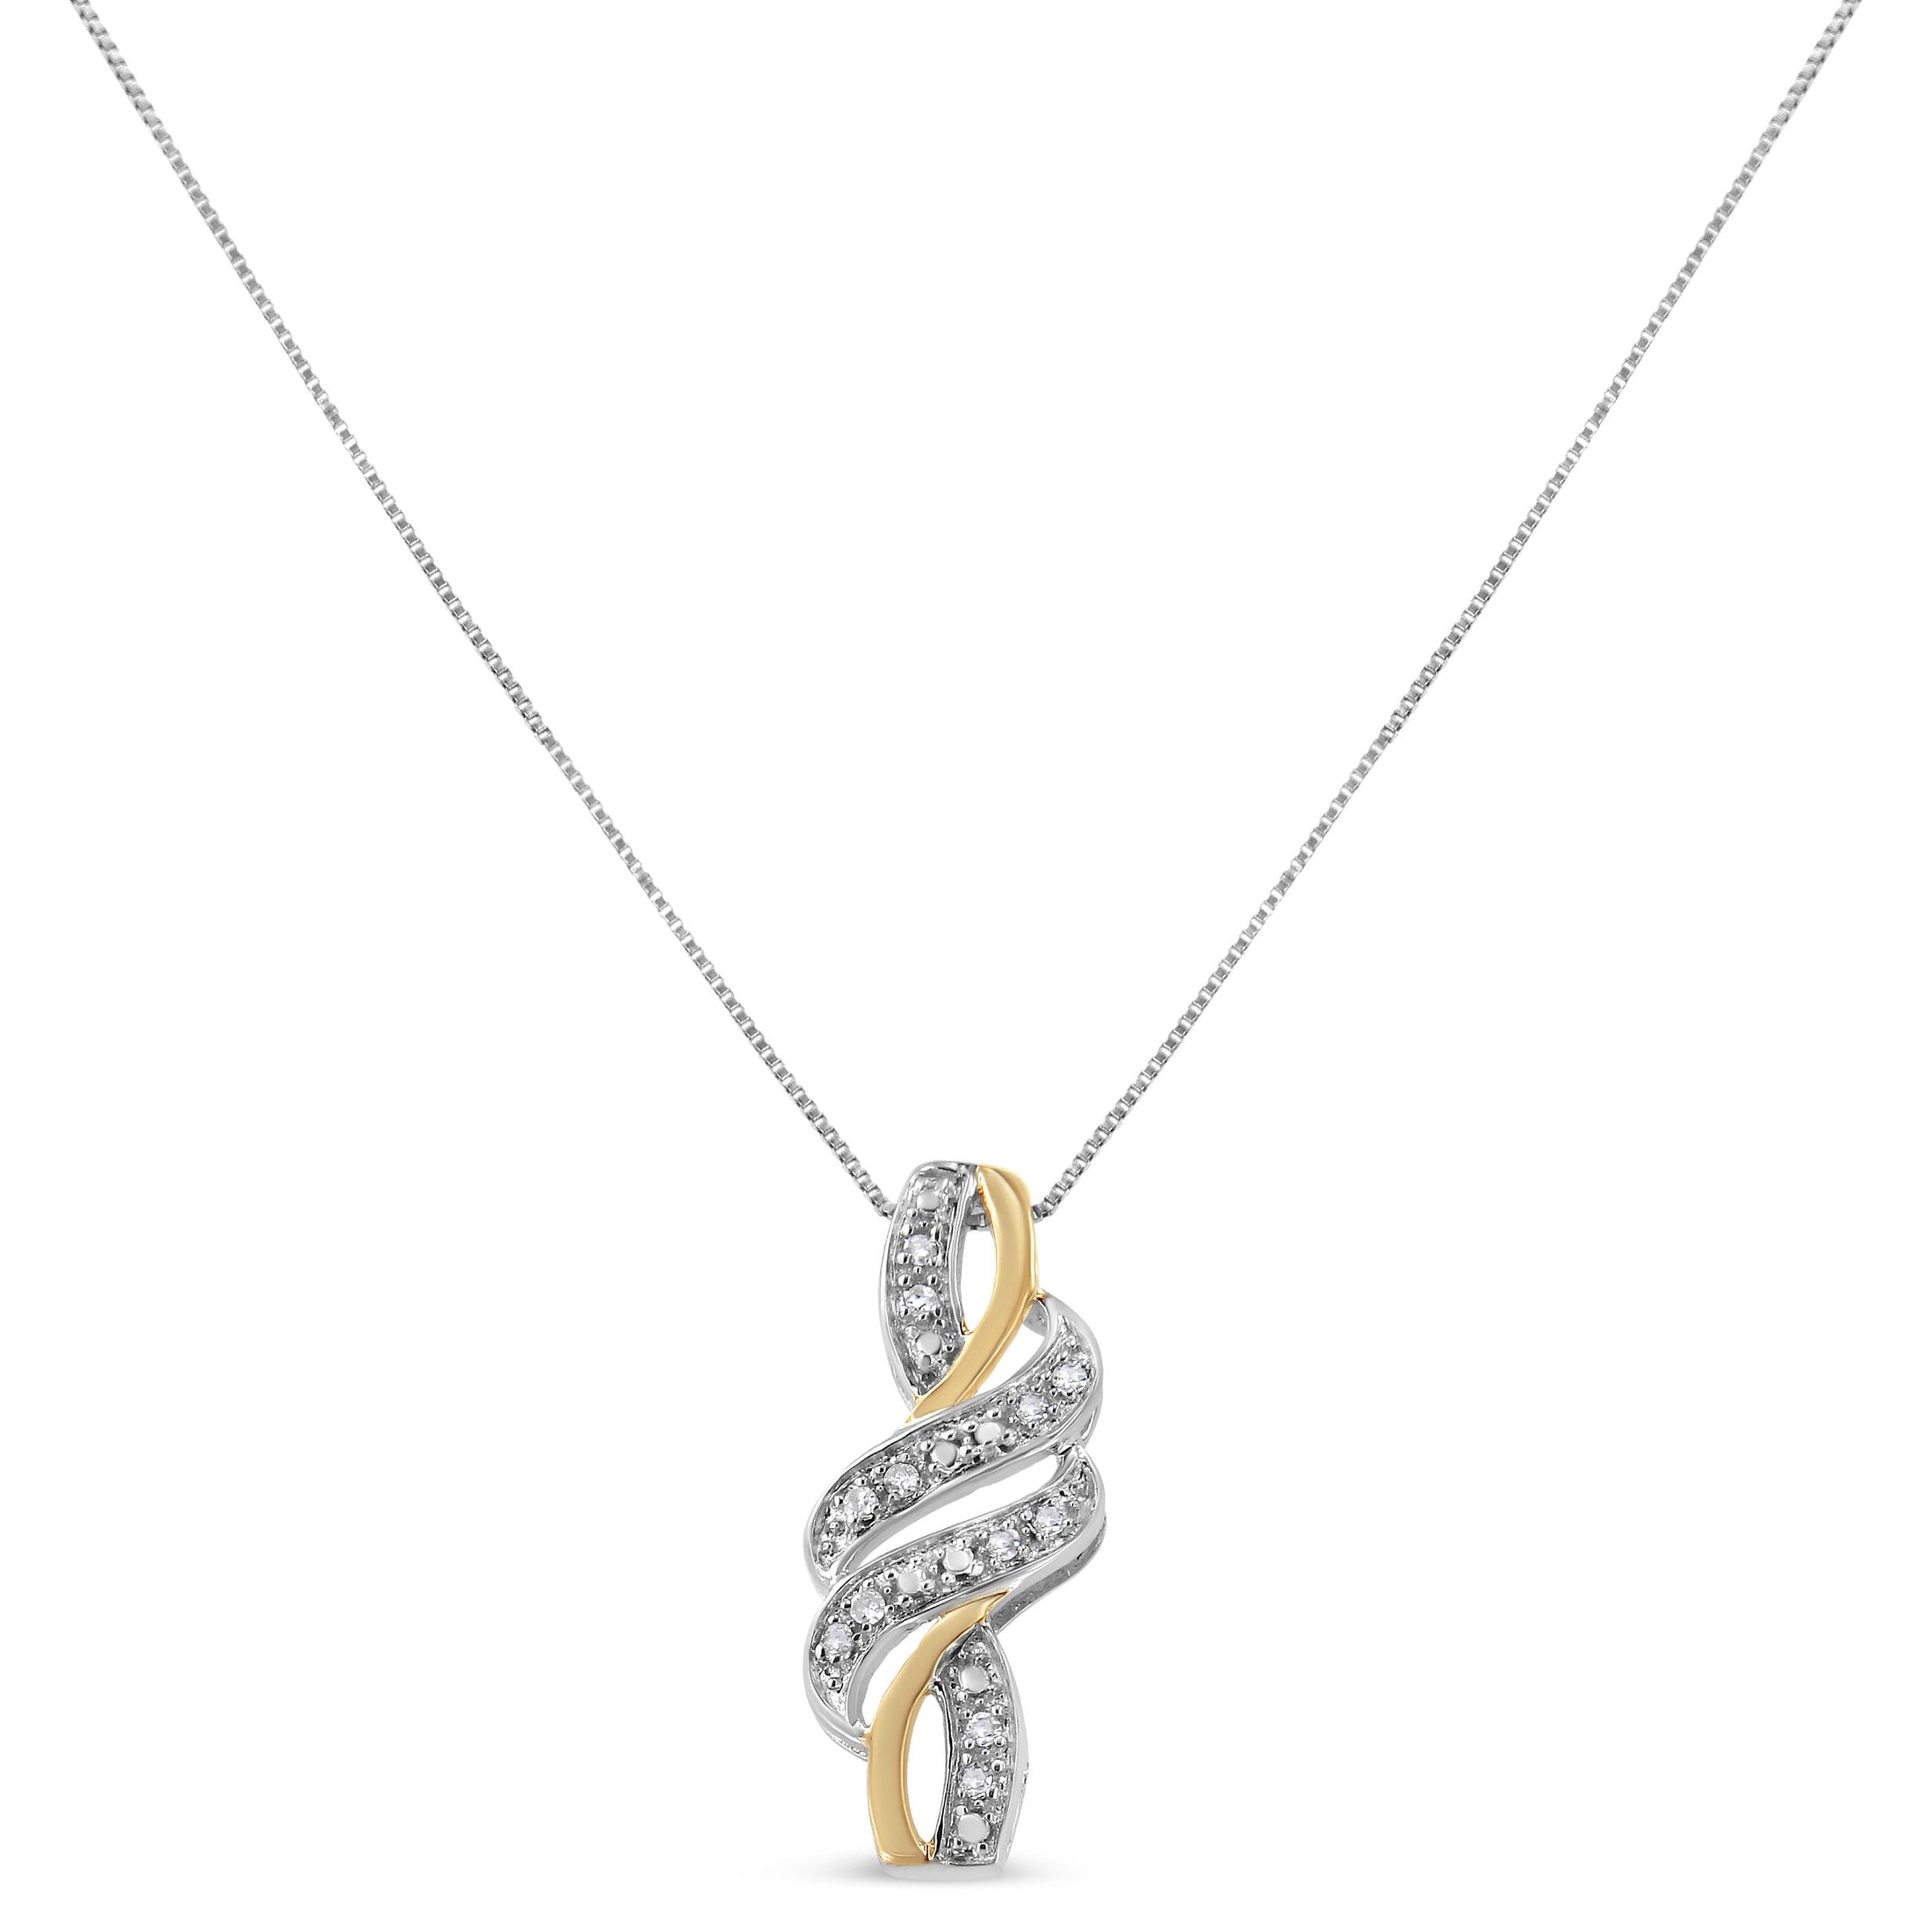 10K Yellow Gold Plated .925 Sterling Silver 1/20 cttw Round Cut Diamond Swirl Pendant Necklace